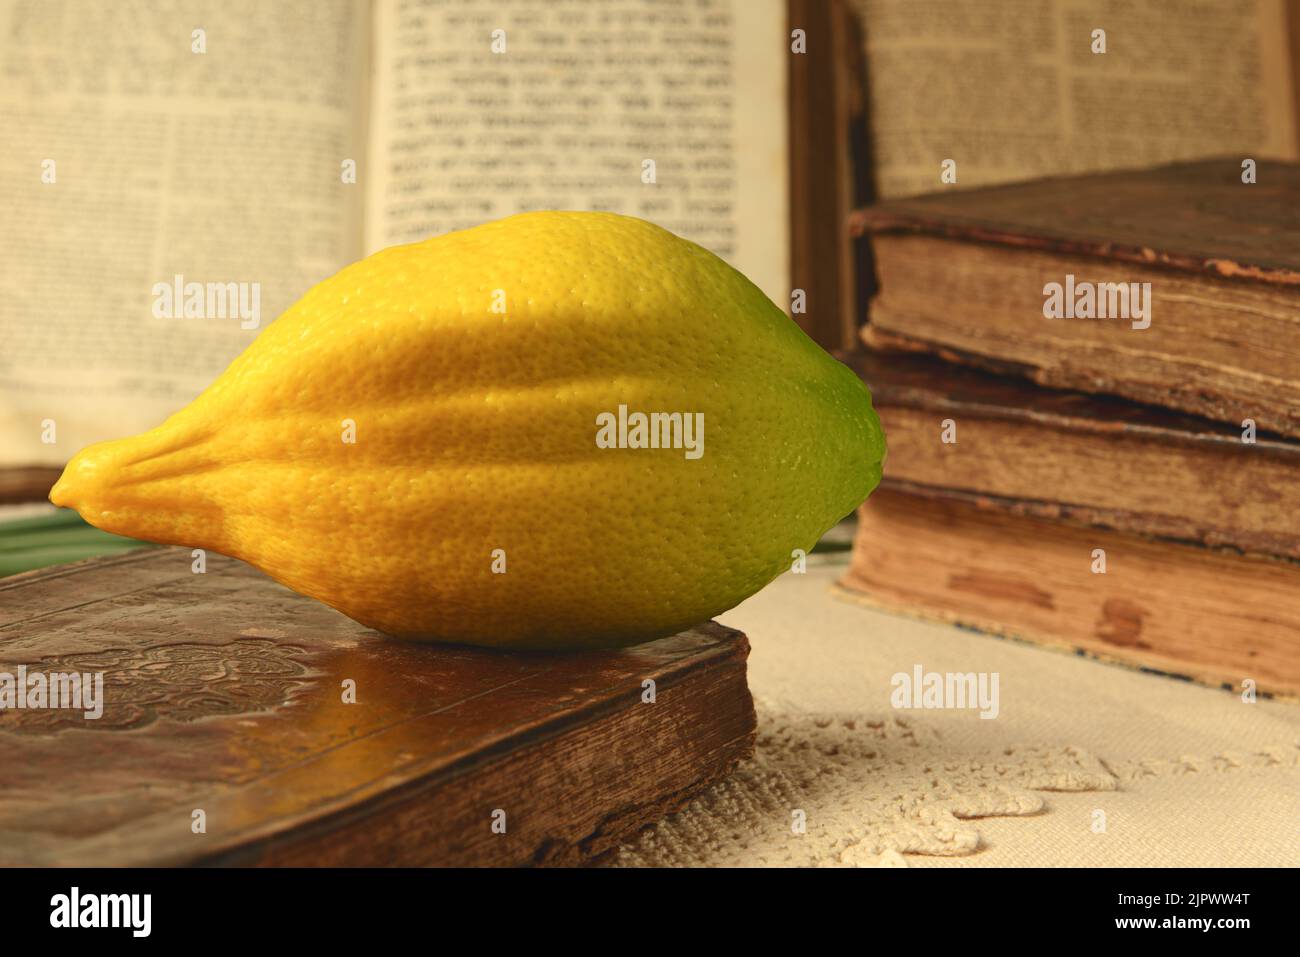 Festival of Sukkot. Book of Leviticus and etrog, symbol of Torah-commanded holiday. Closeup Stock Photo